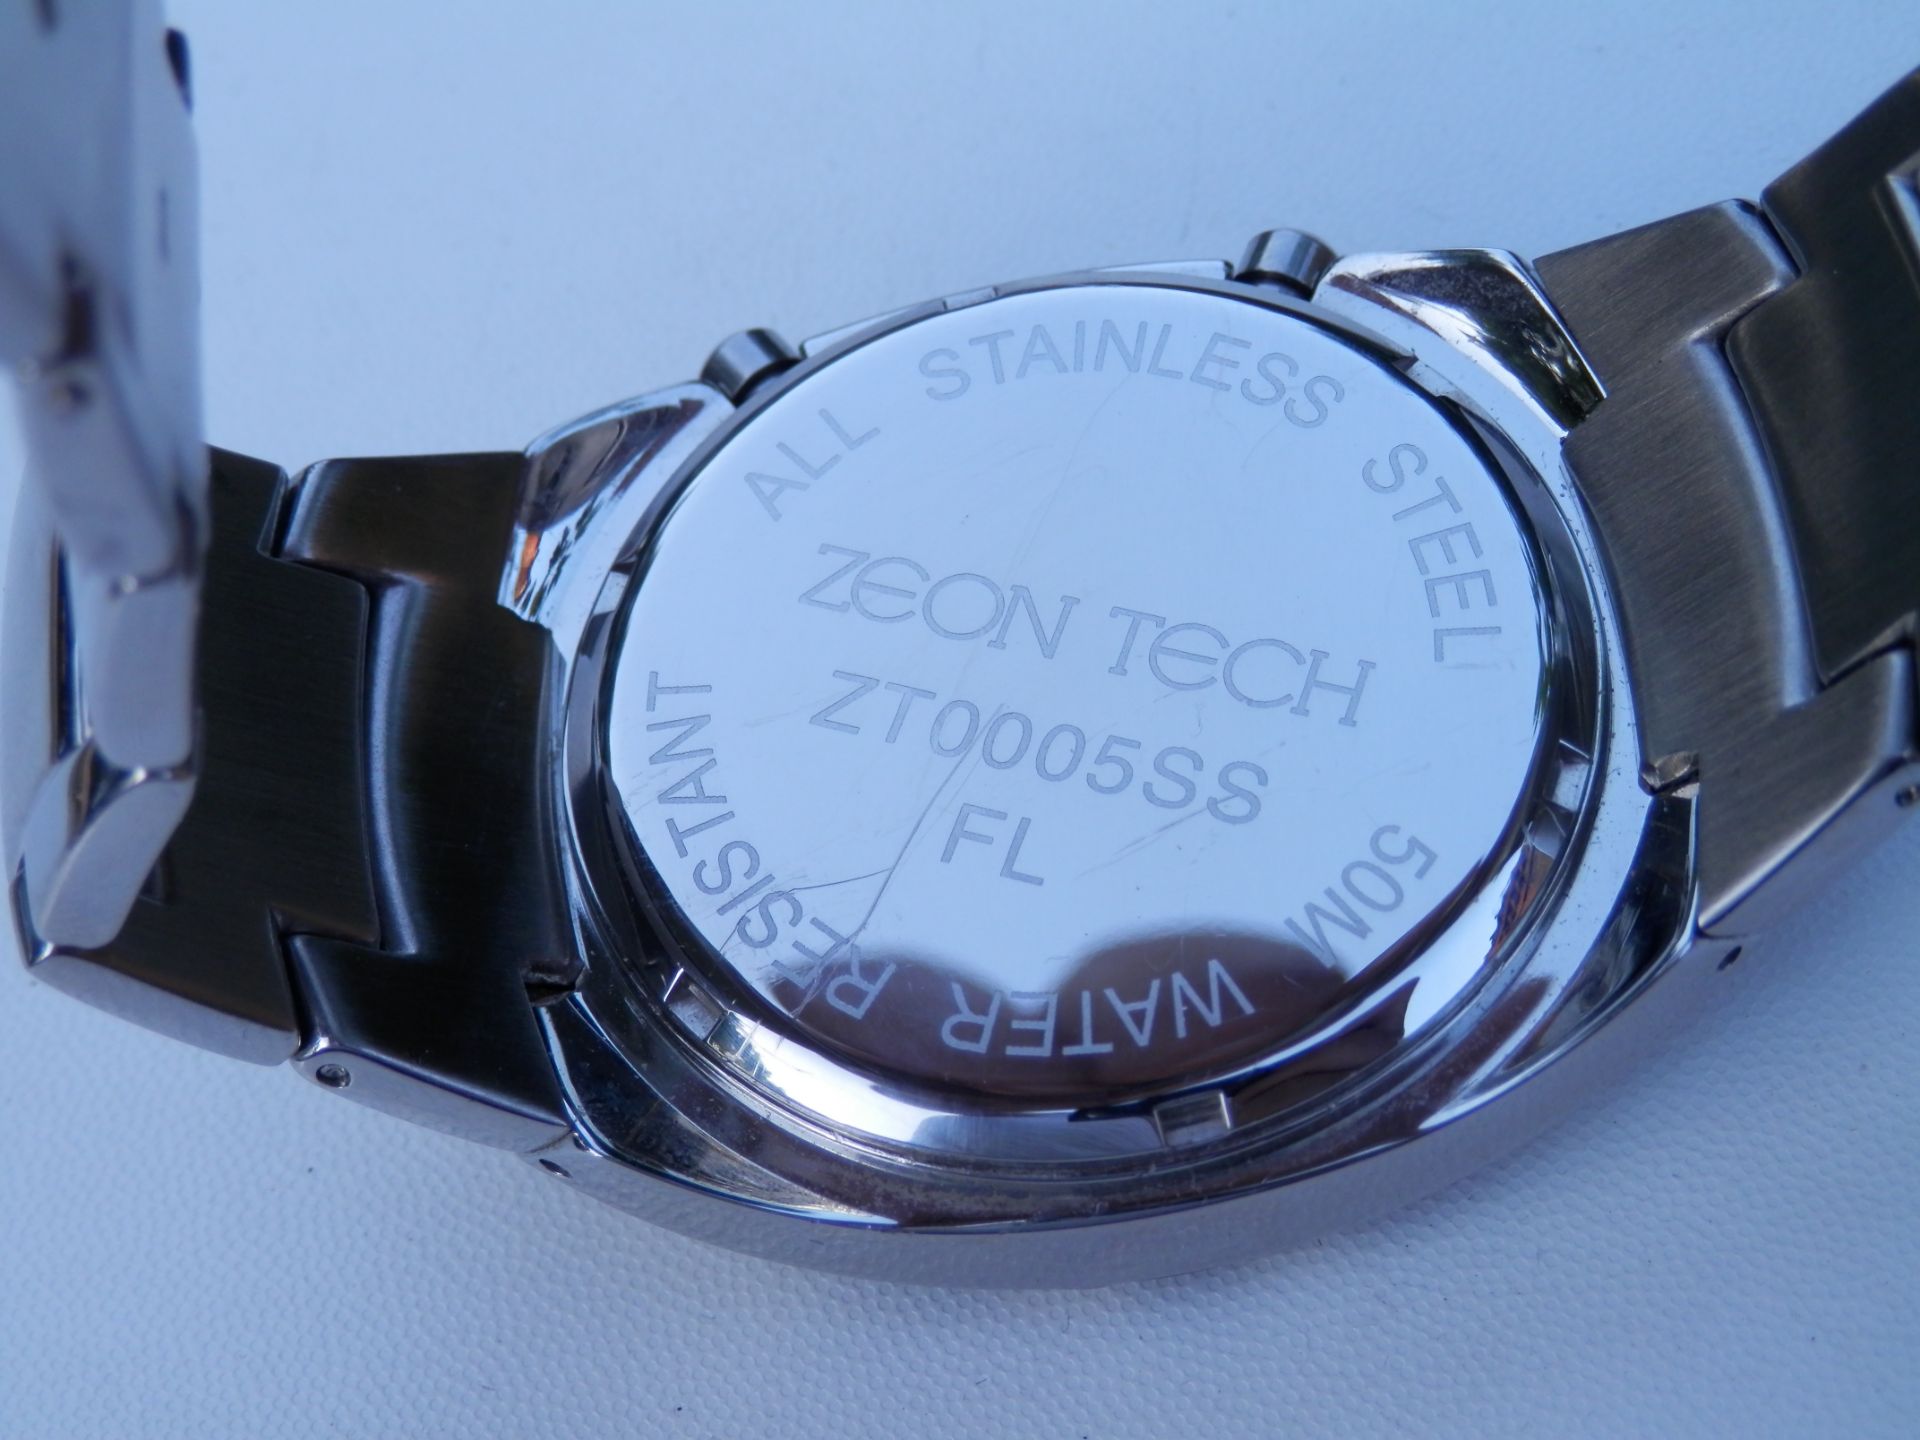 RRP £150 SOLSANO DIGITAL DOT WATCH, NEW/OLD STOCK FROM A CLOSING WATCH SHOP, NEW BATTERY & WORKING. - Image 10 of 10